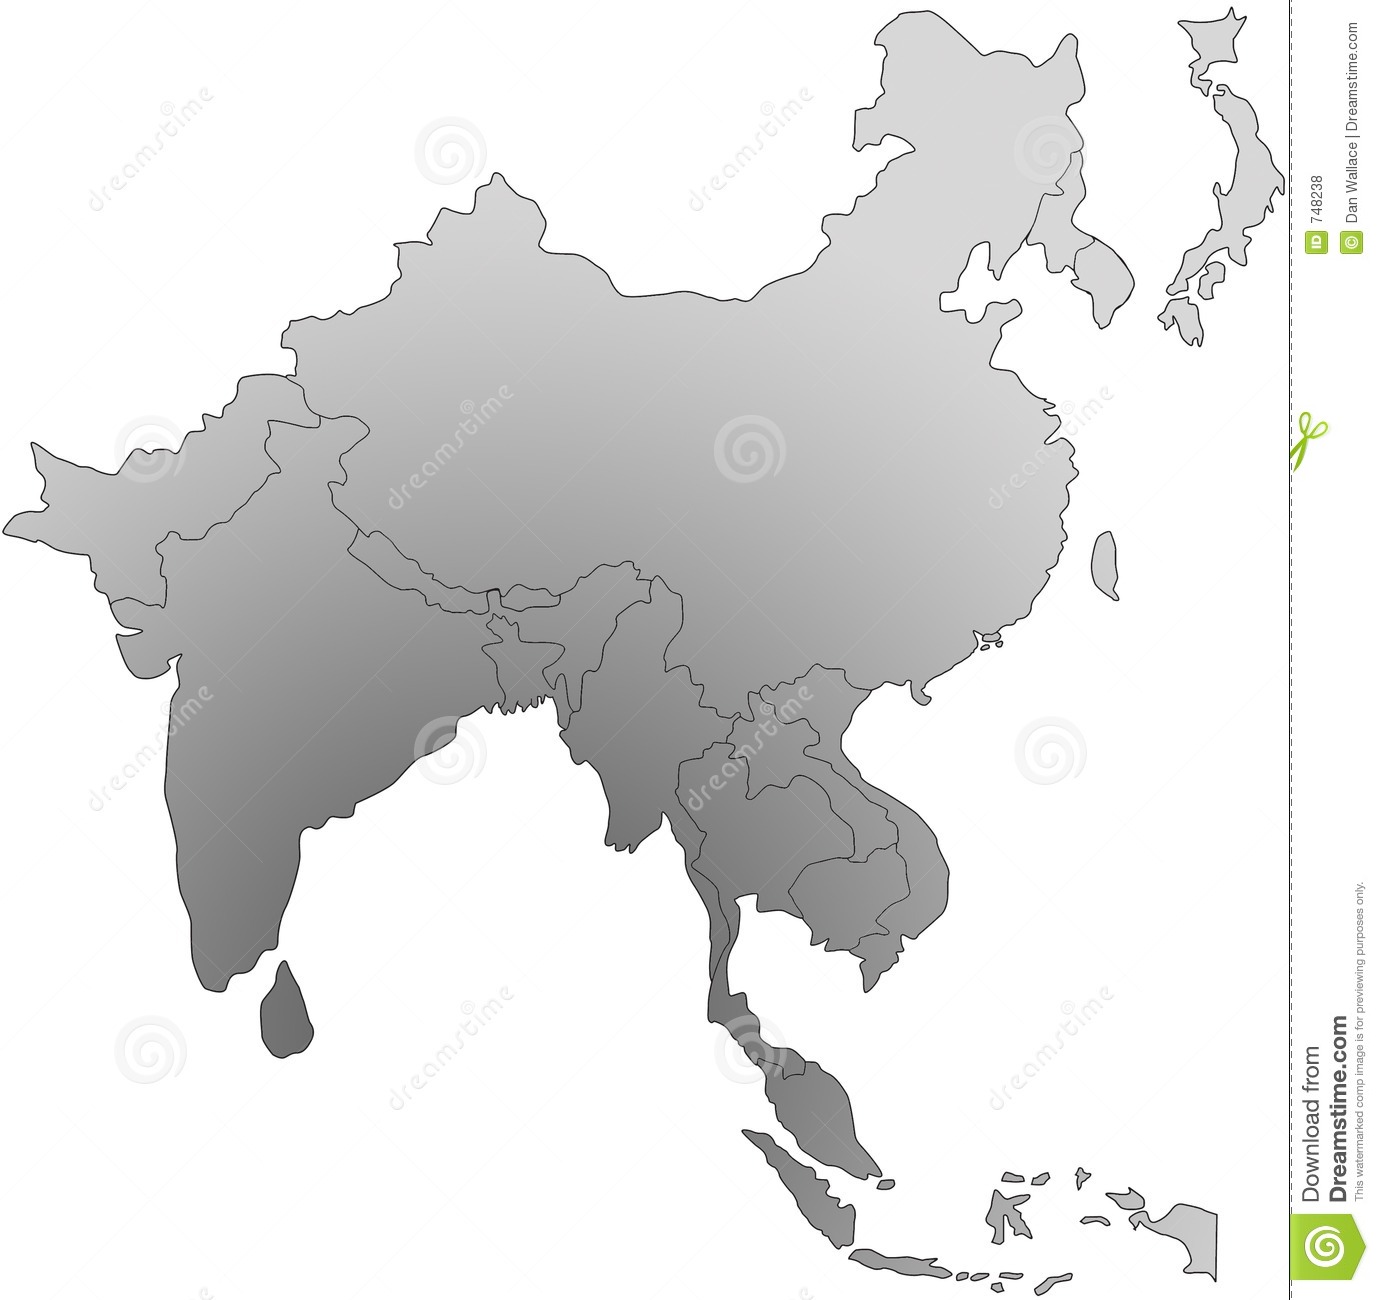 Southeast Asia Map Black and White